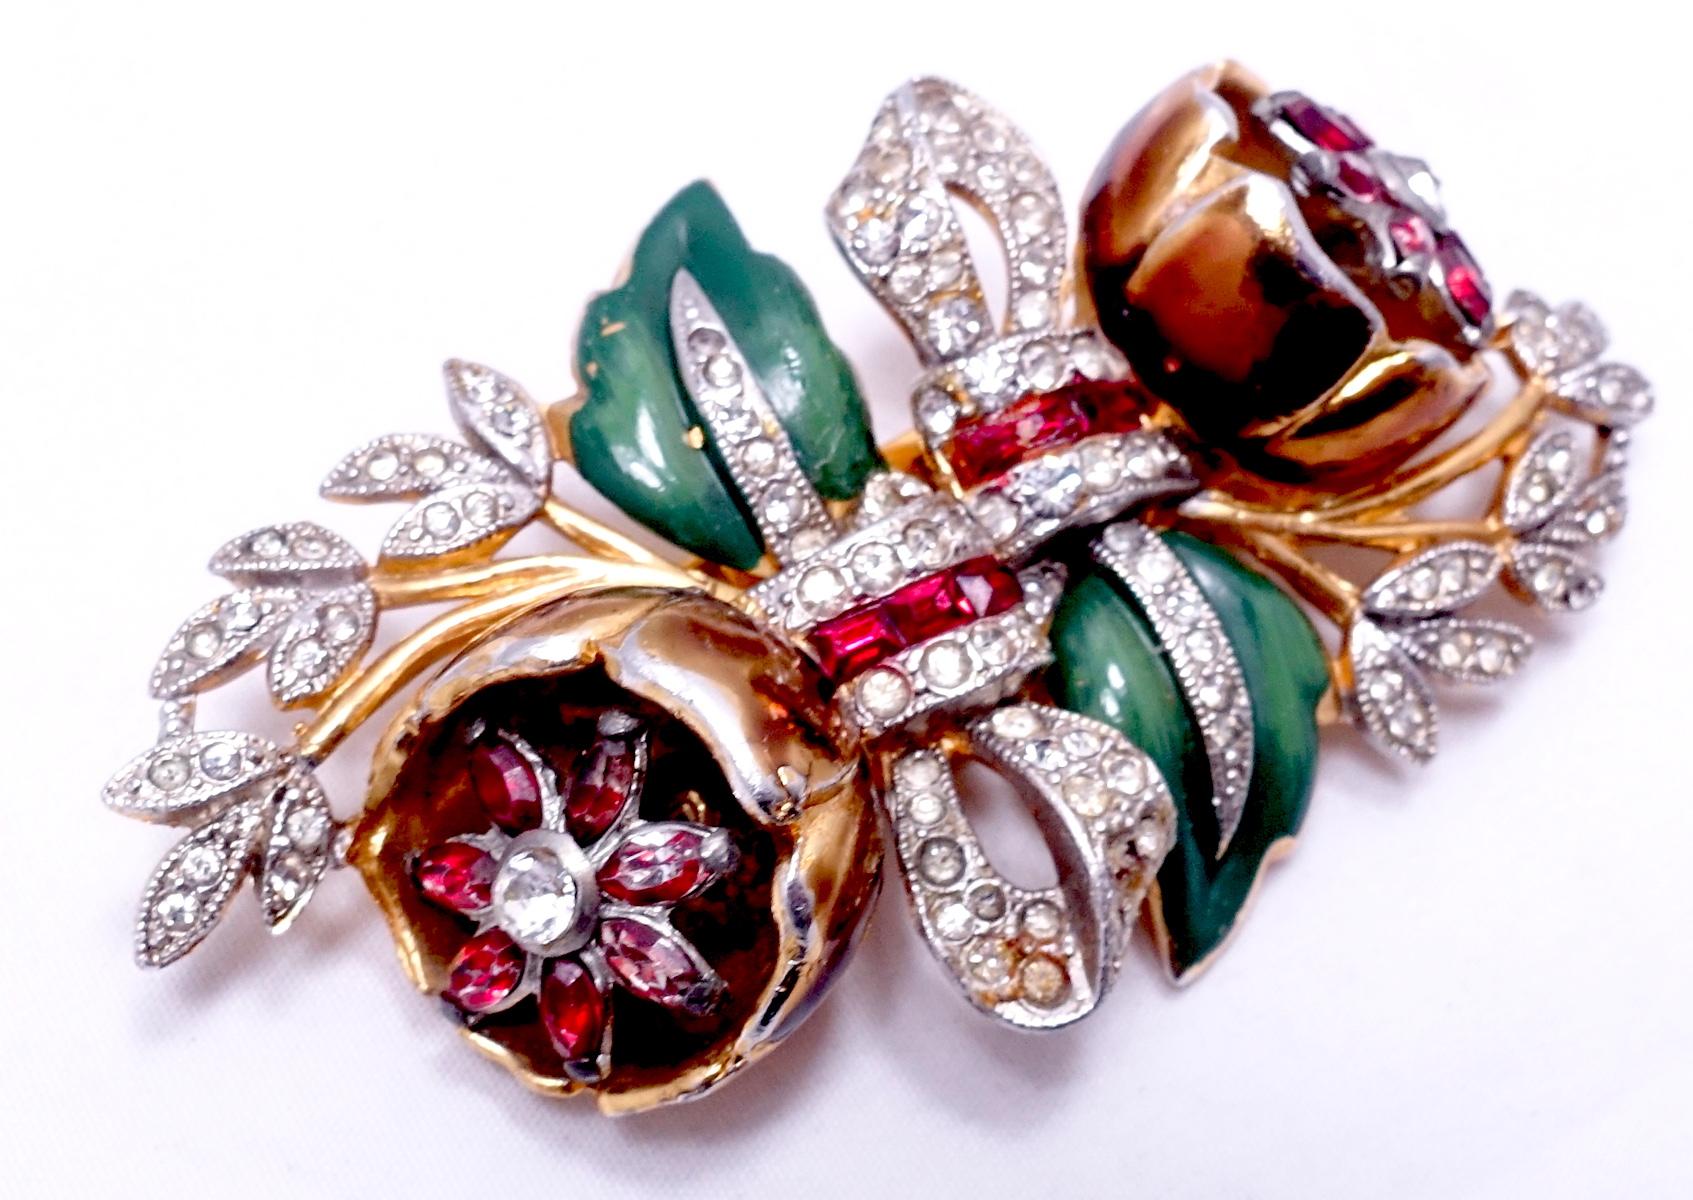 This vintage Coro duette features a floral design with green enameling and red and clear crystal accents in a gold tone setting.  In excellent condition, this piece measures 2-7/8” x 1-1/2” and is signed “Coro Duette”.